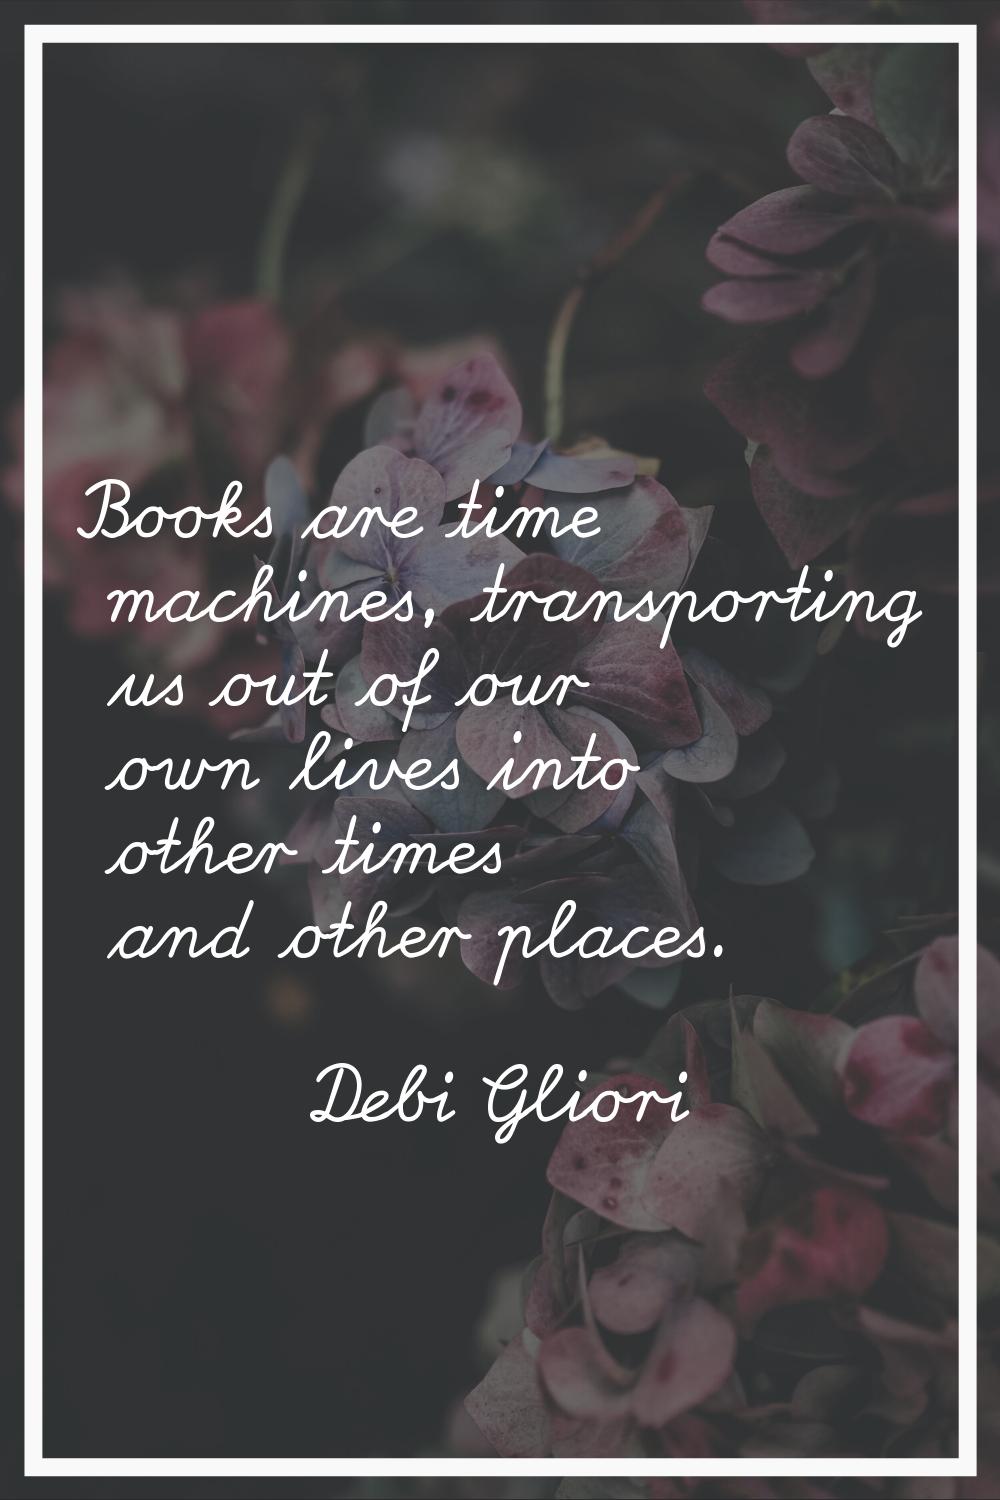 Books are time machines, transporting us out of our own lives into other times and other places.